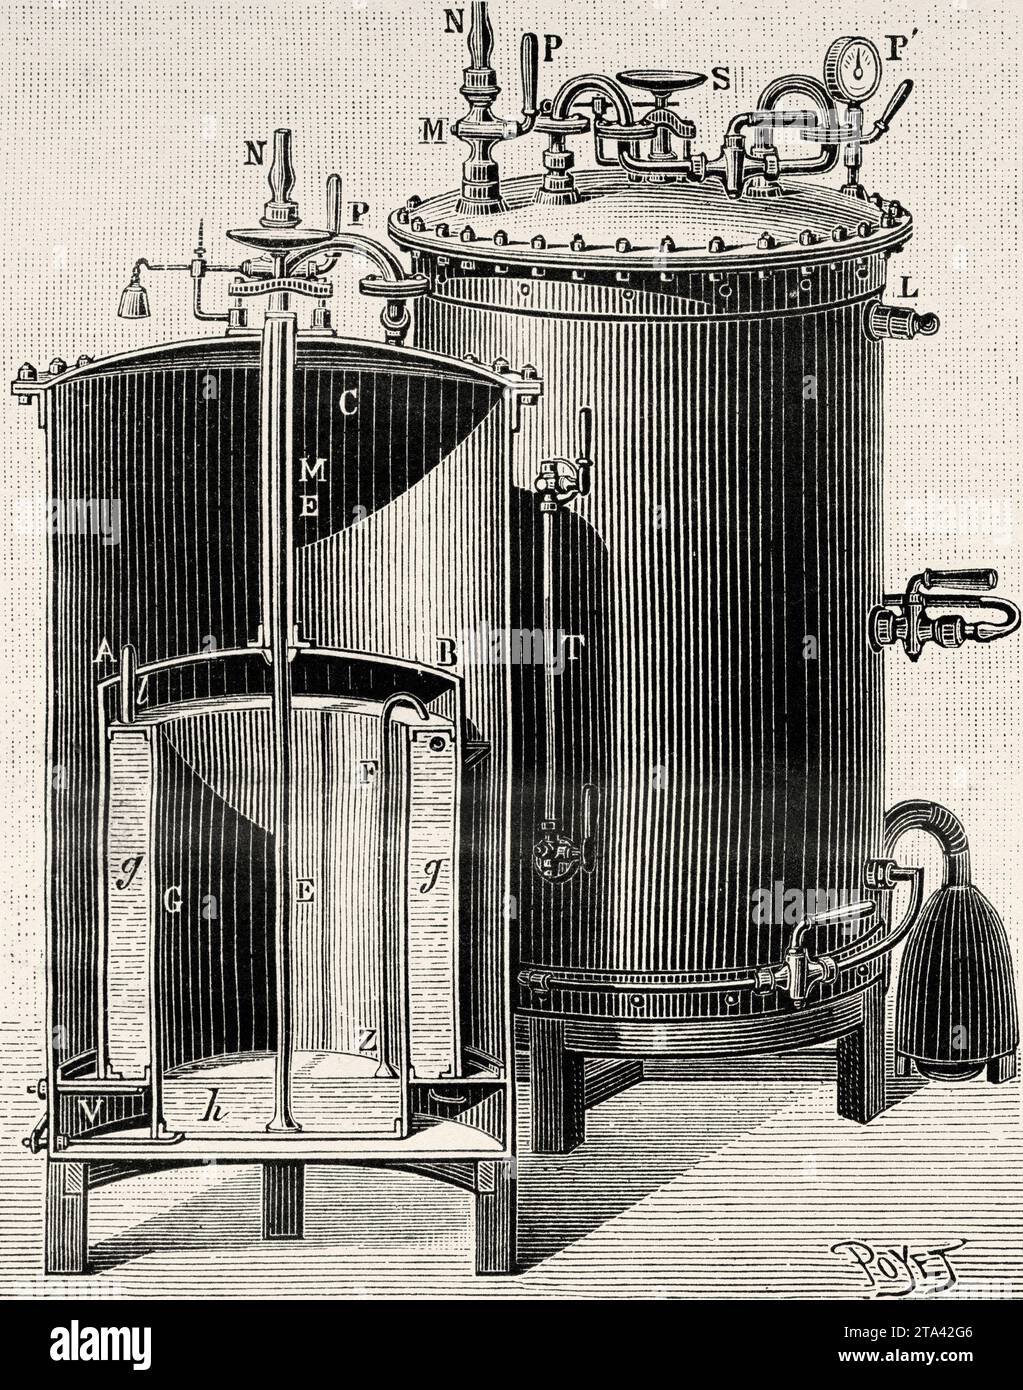 Apparatus for producing gasified air. Old illustration by Louis Poyet (1846-1913) from La Nature 1887 Stock Photo